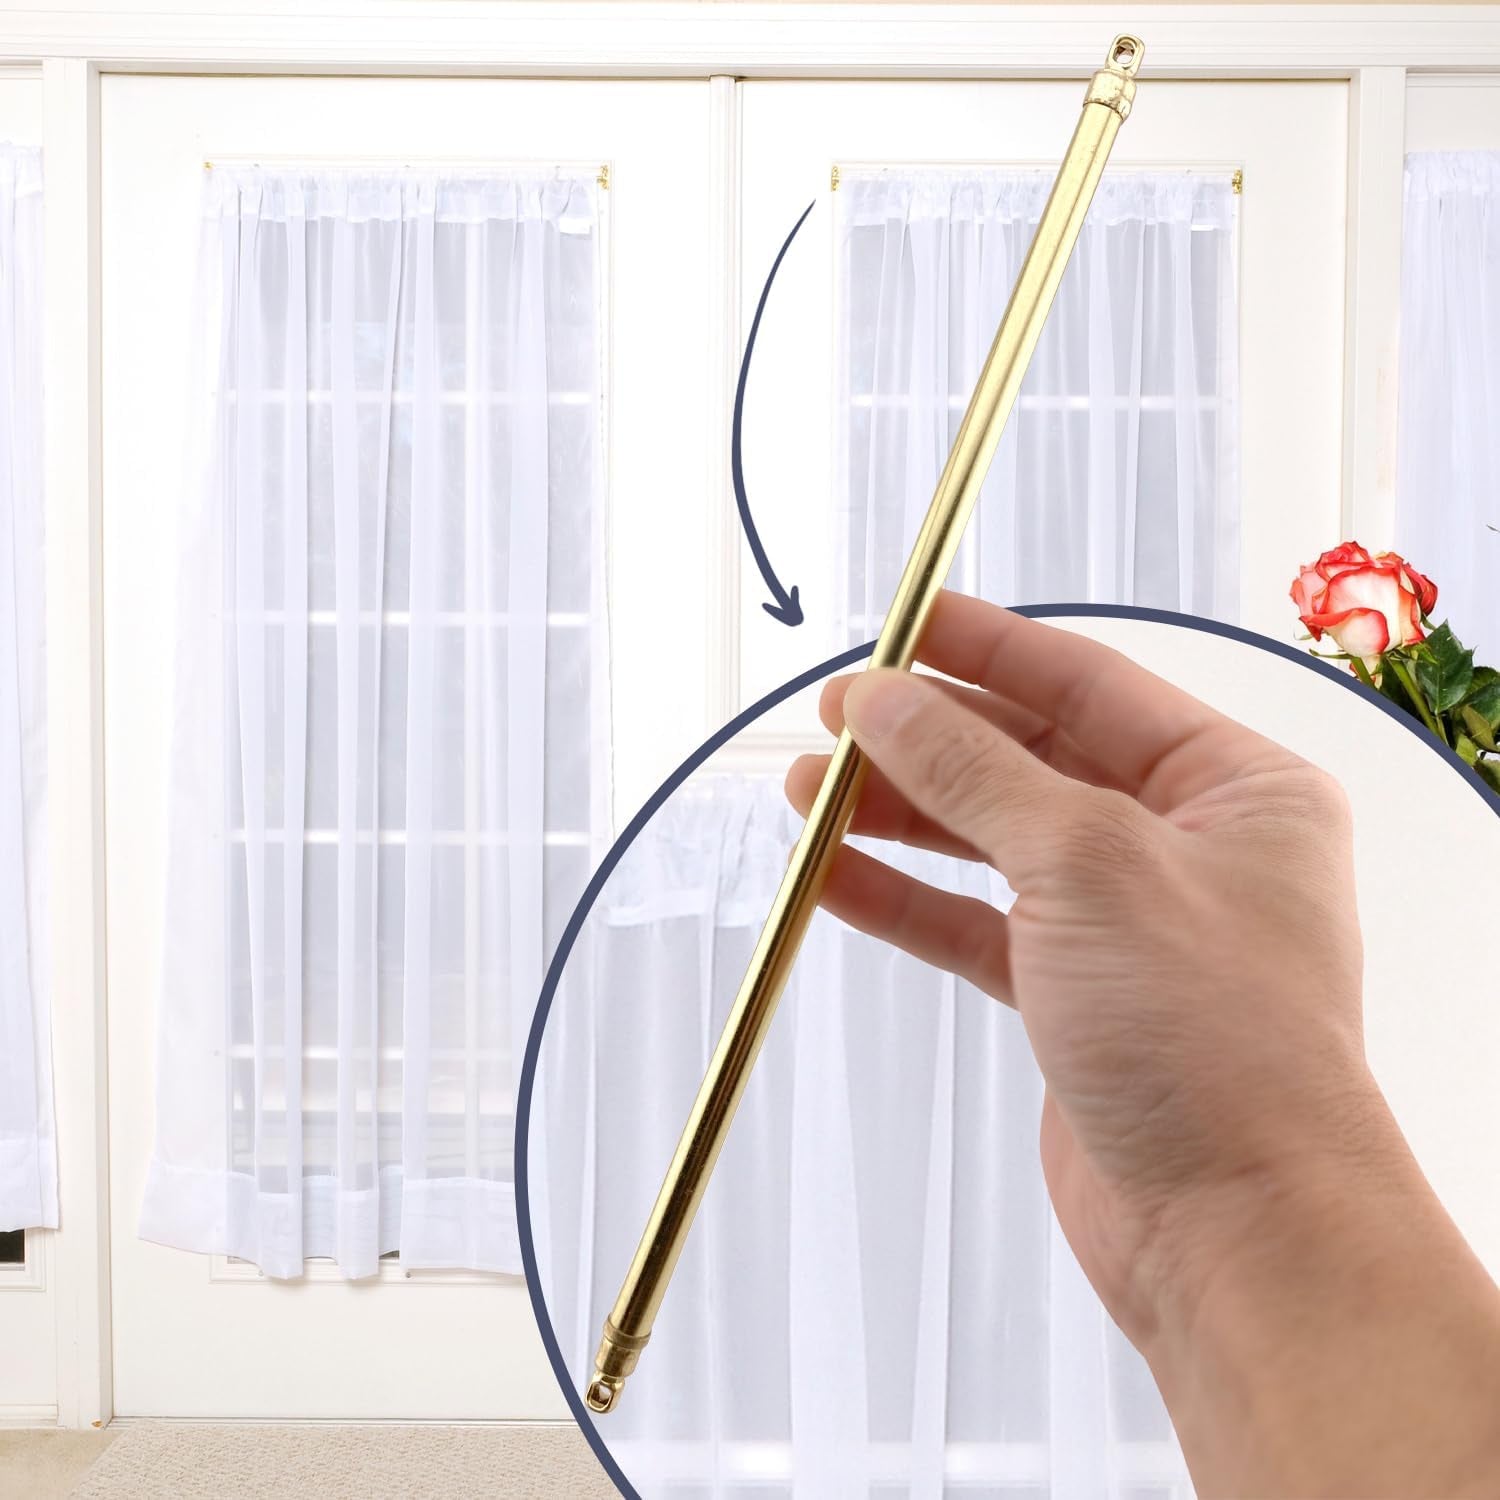 Amazing Drapery Hardware Swivel Sash Curtain Rods with Brass Finish, Set of 2 (Hardware Included) - Adjustable Length 21-38 Inches, Easy to Install Metal Rods for Doors, Windows, and Sidelights